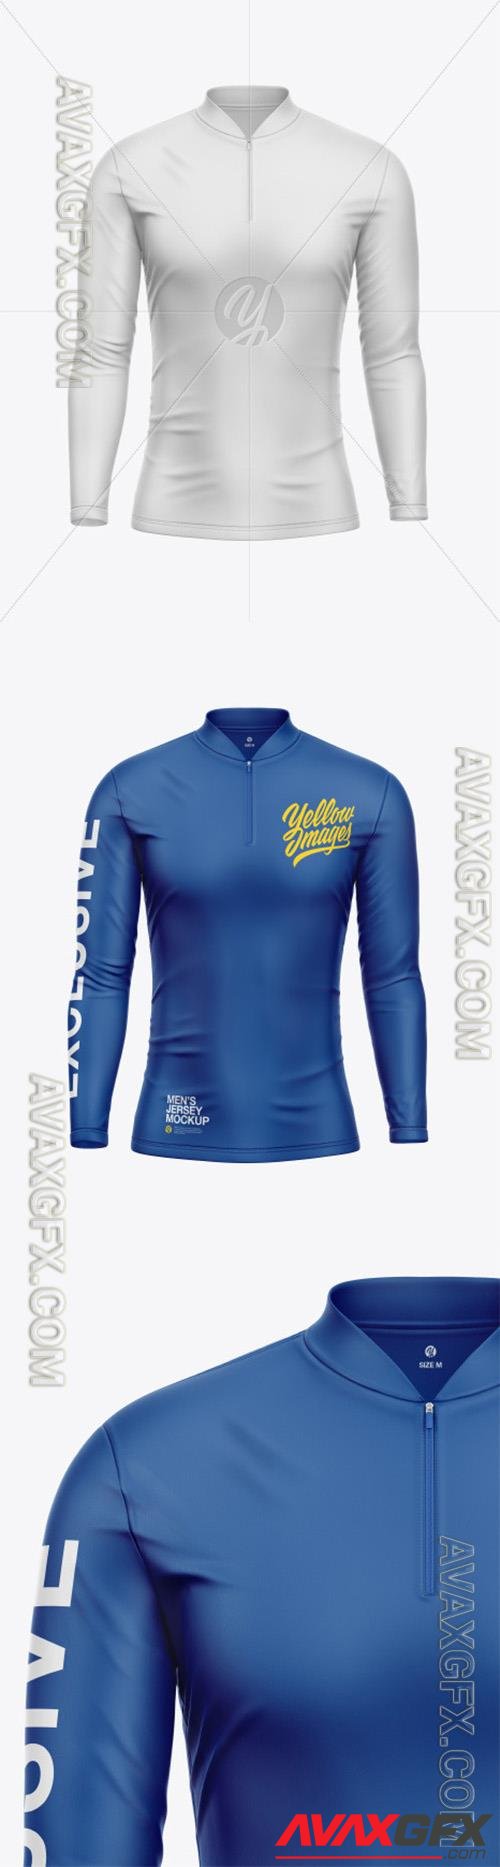 Men's Jersey With Long Sleeve Mockup 91282